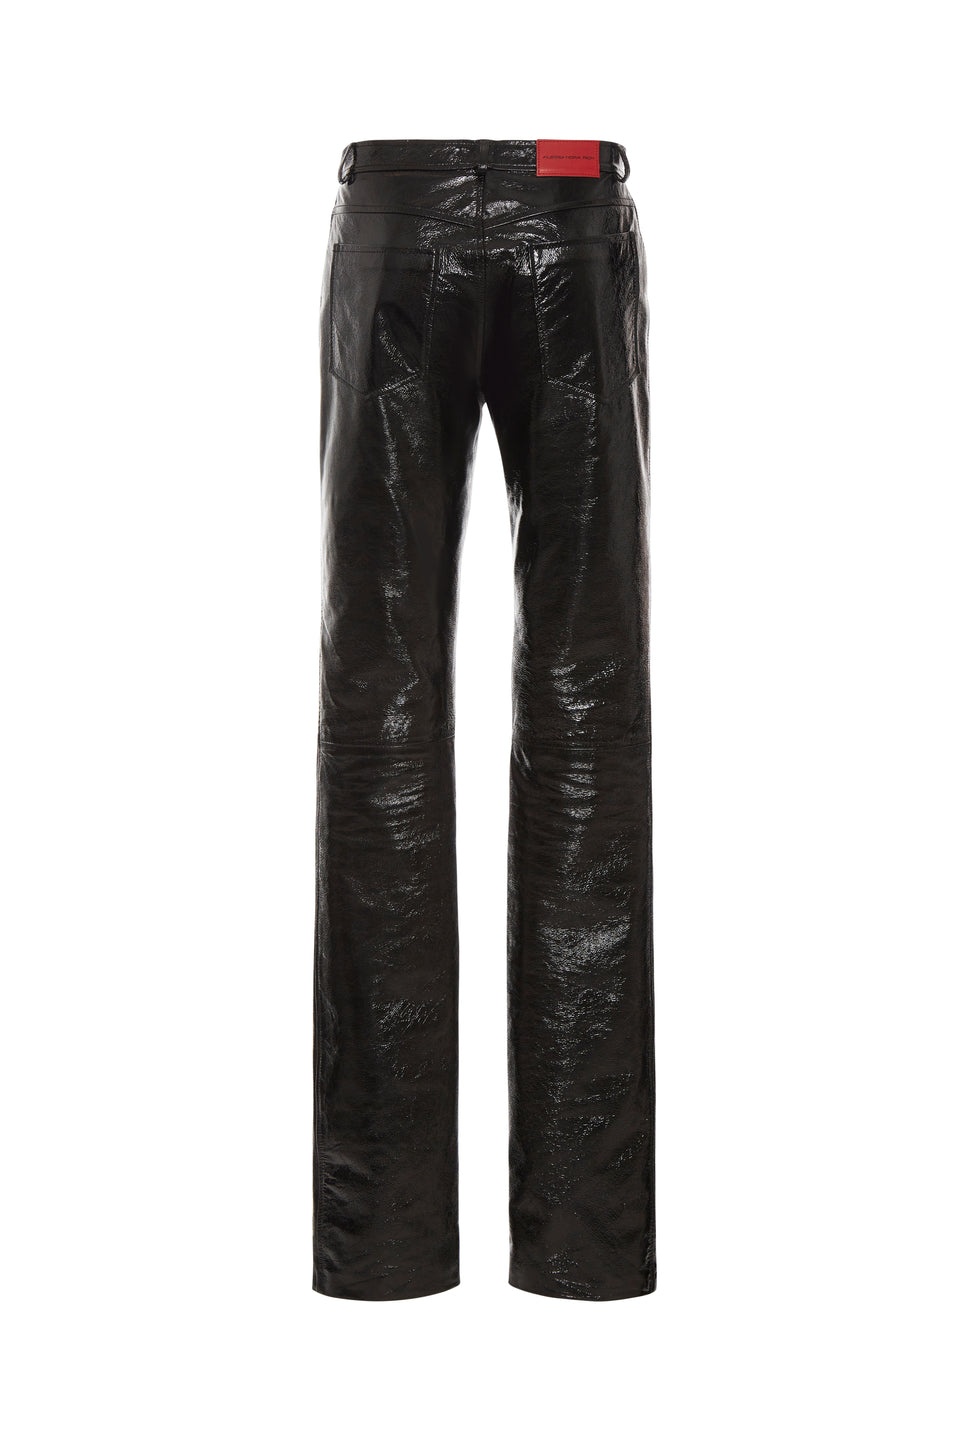 PATENT LEATHER TROUSERS - 2